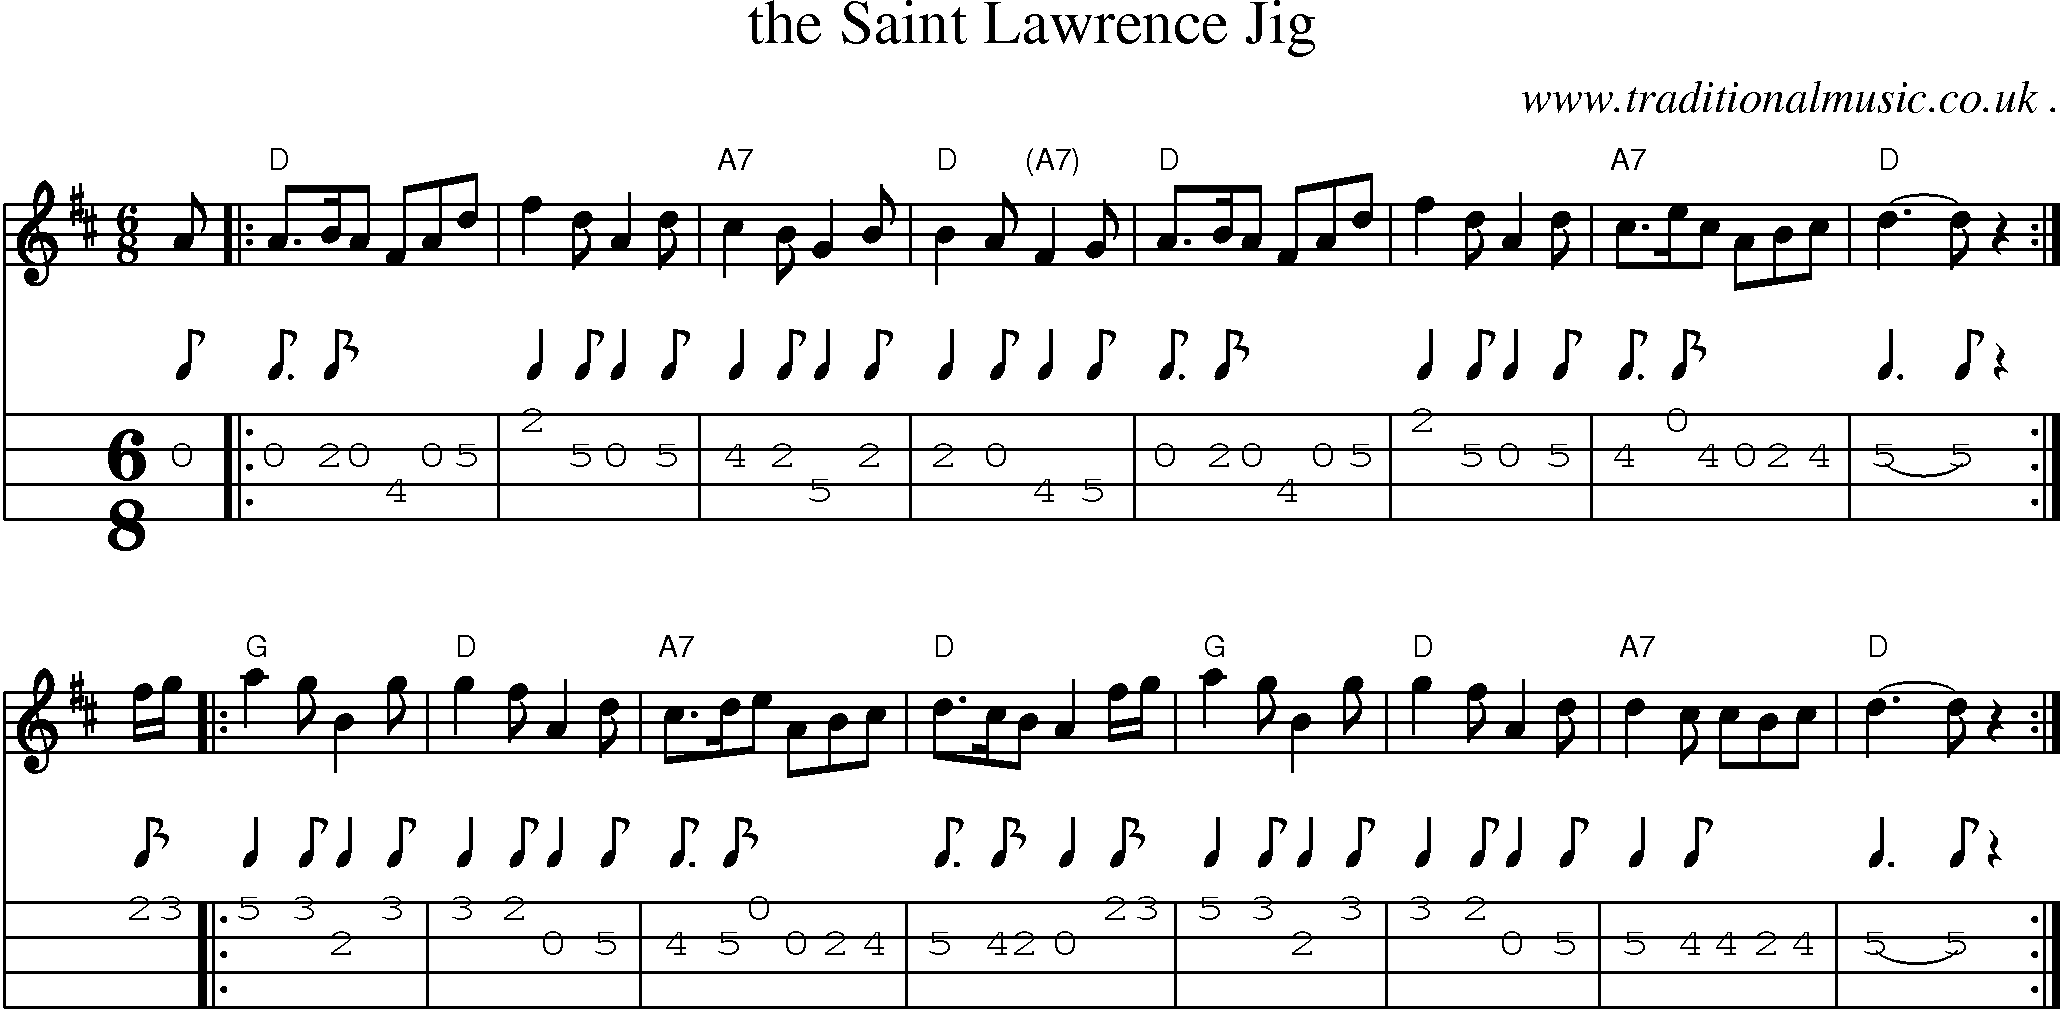 Sheet-music  score, Chords and Mandolin Tabs for The Saint Lawrence Jig